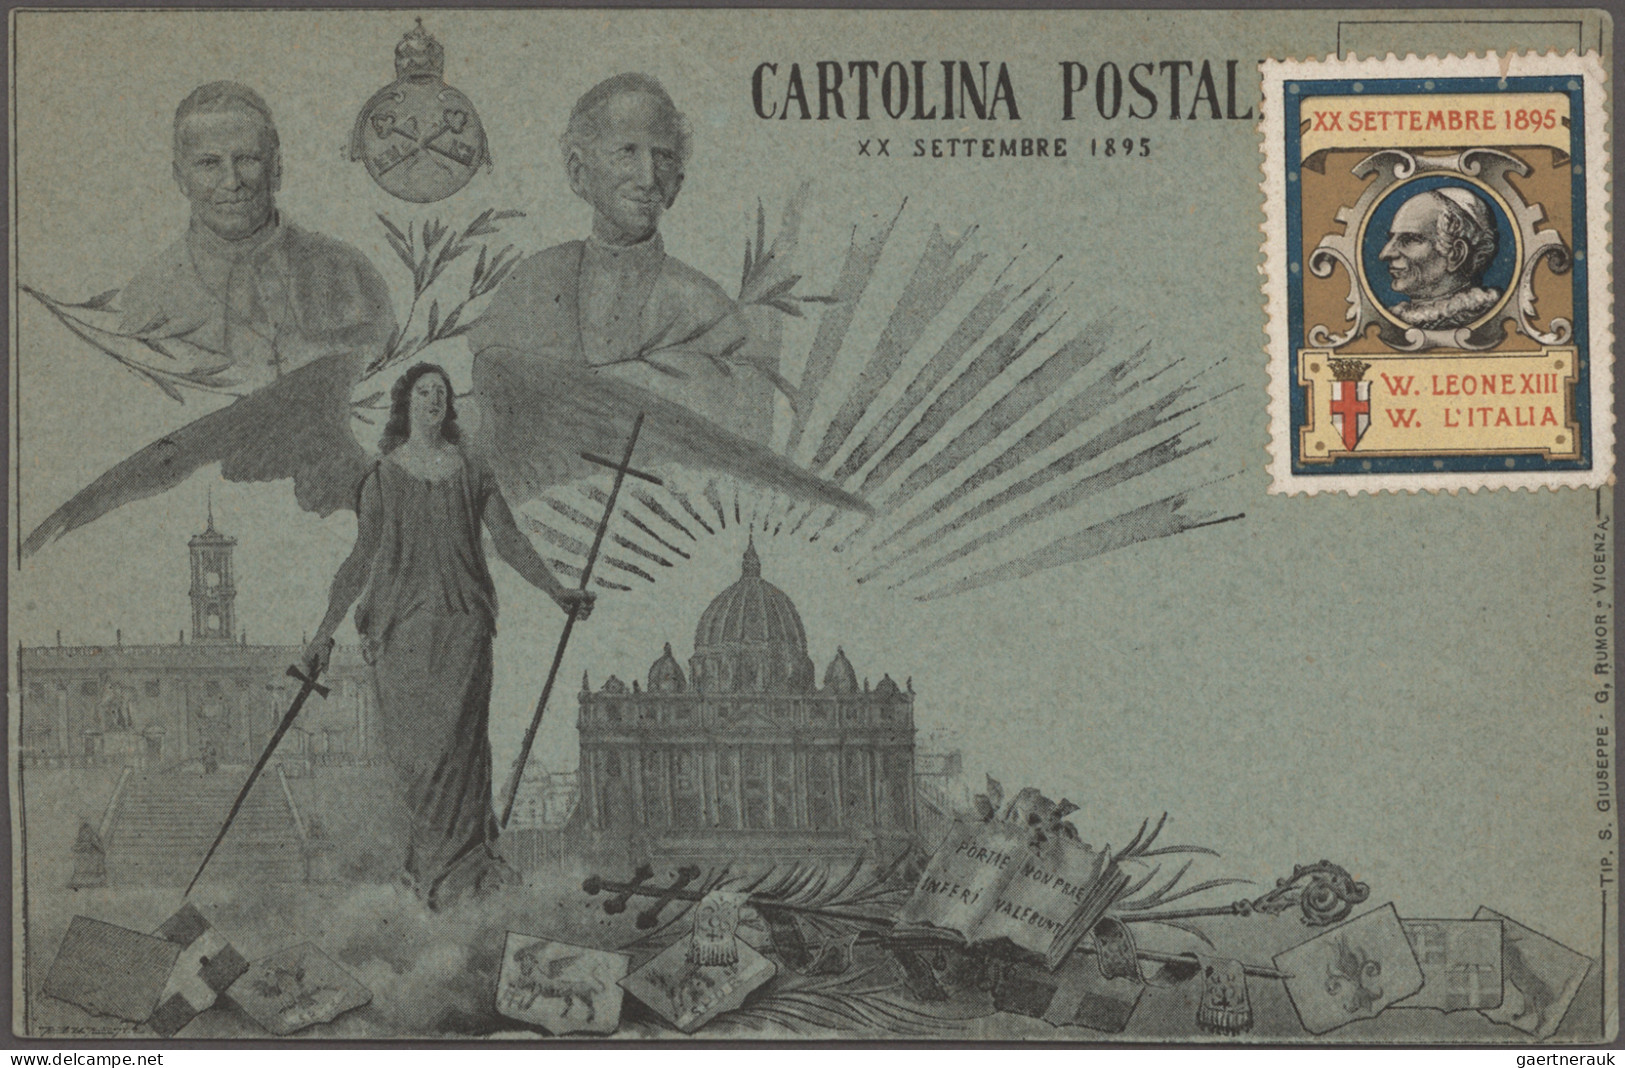 Vatican City: 1950/2005, balance of apprx. 300 philatelic covers/cards, incl. st